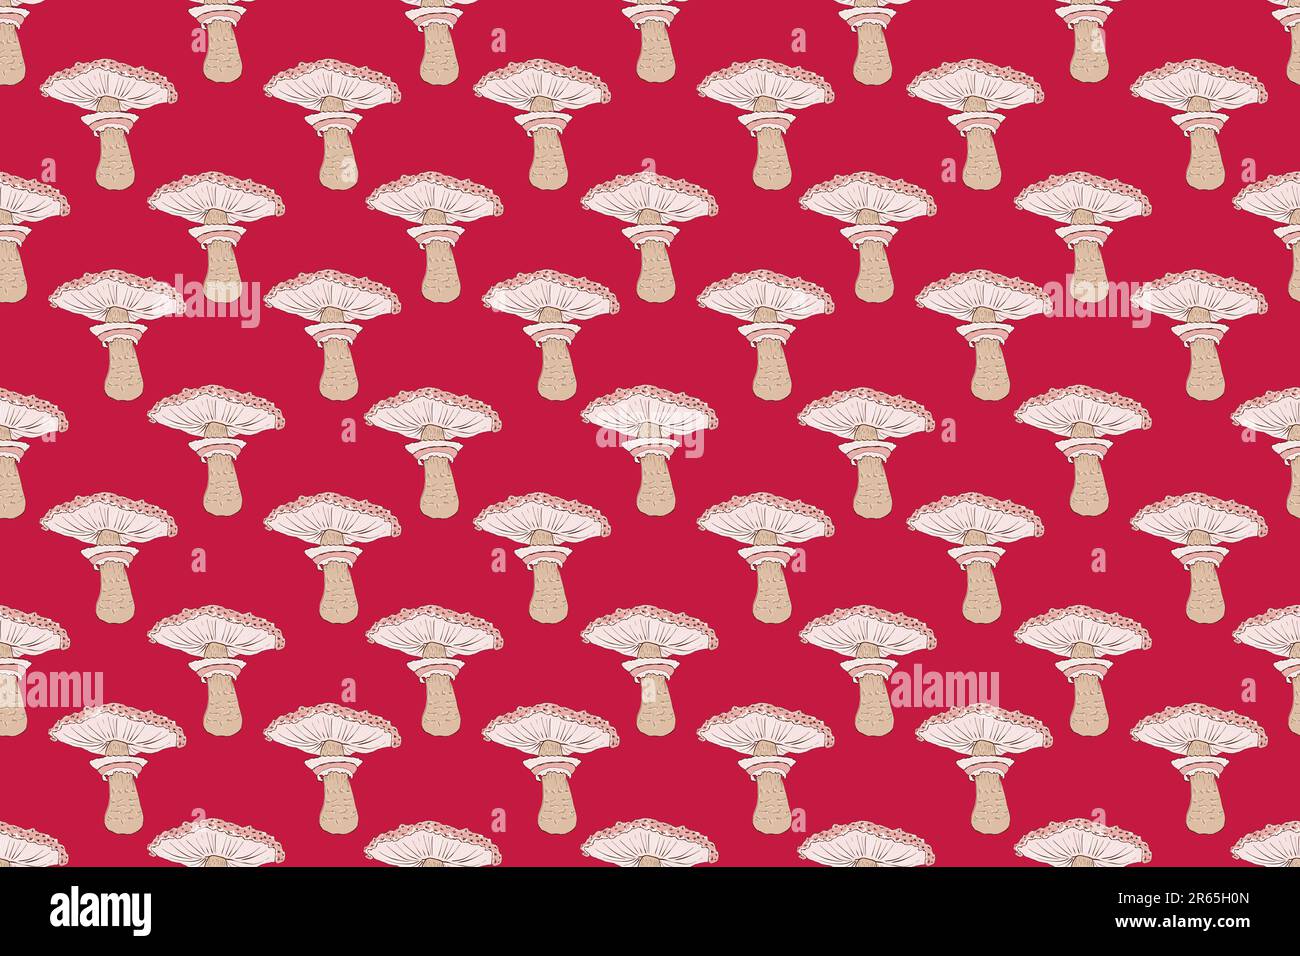 Seamless pattern of mushrooms. Hand drawing illustration in cartoon style isolated on white Stock Photo